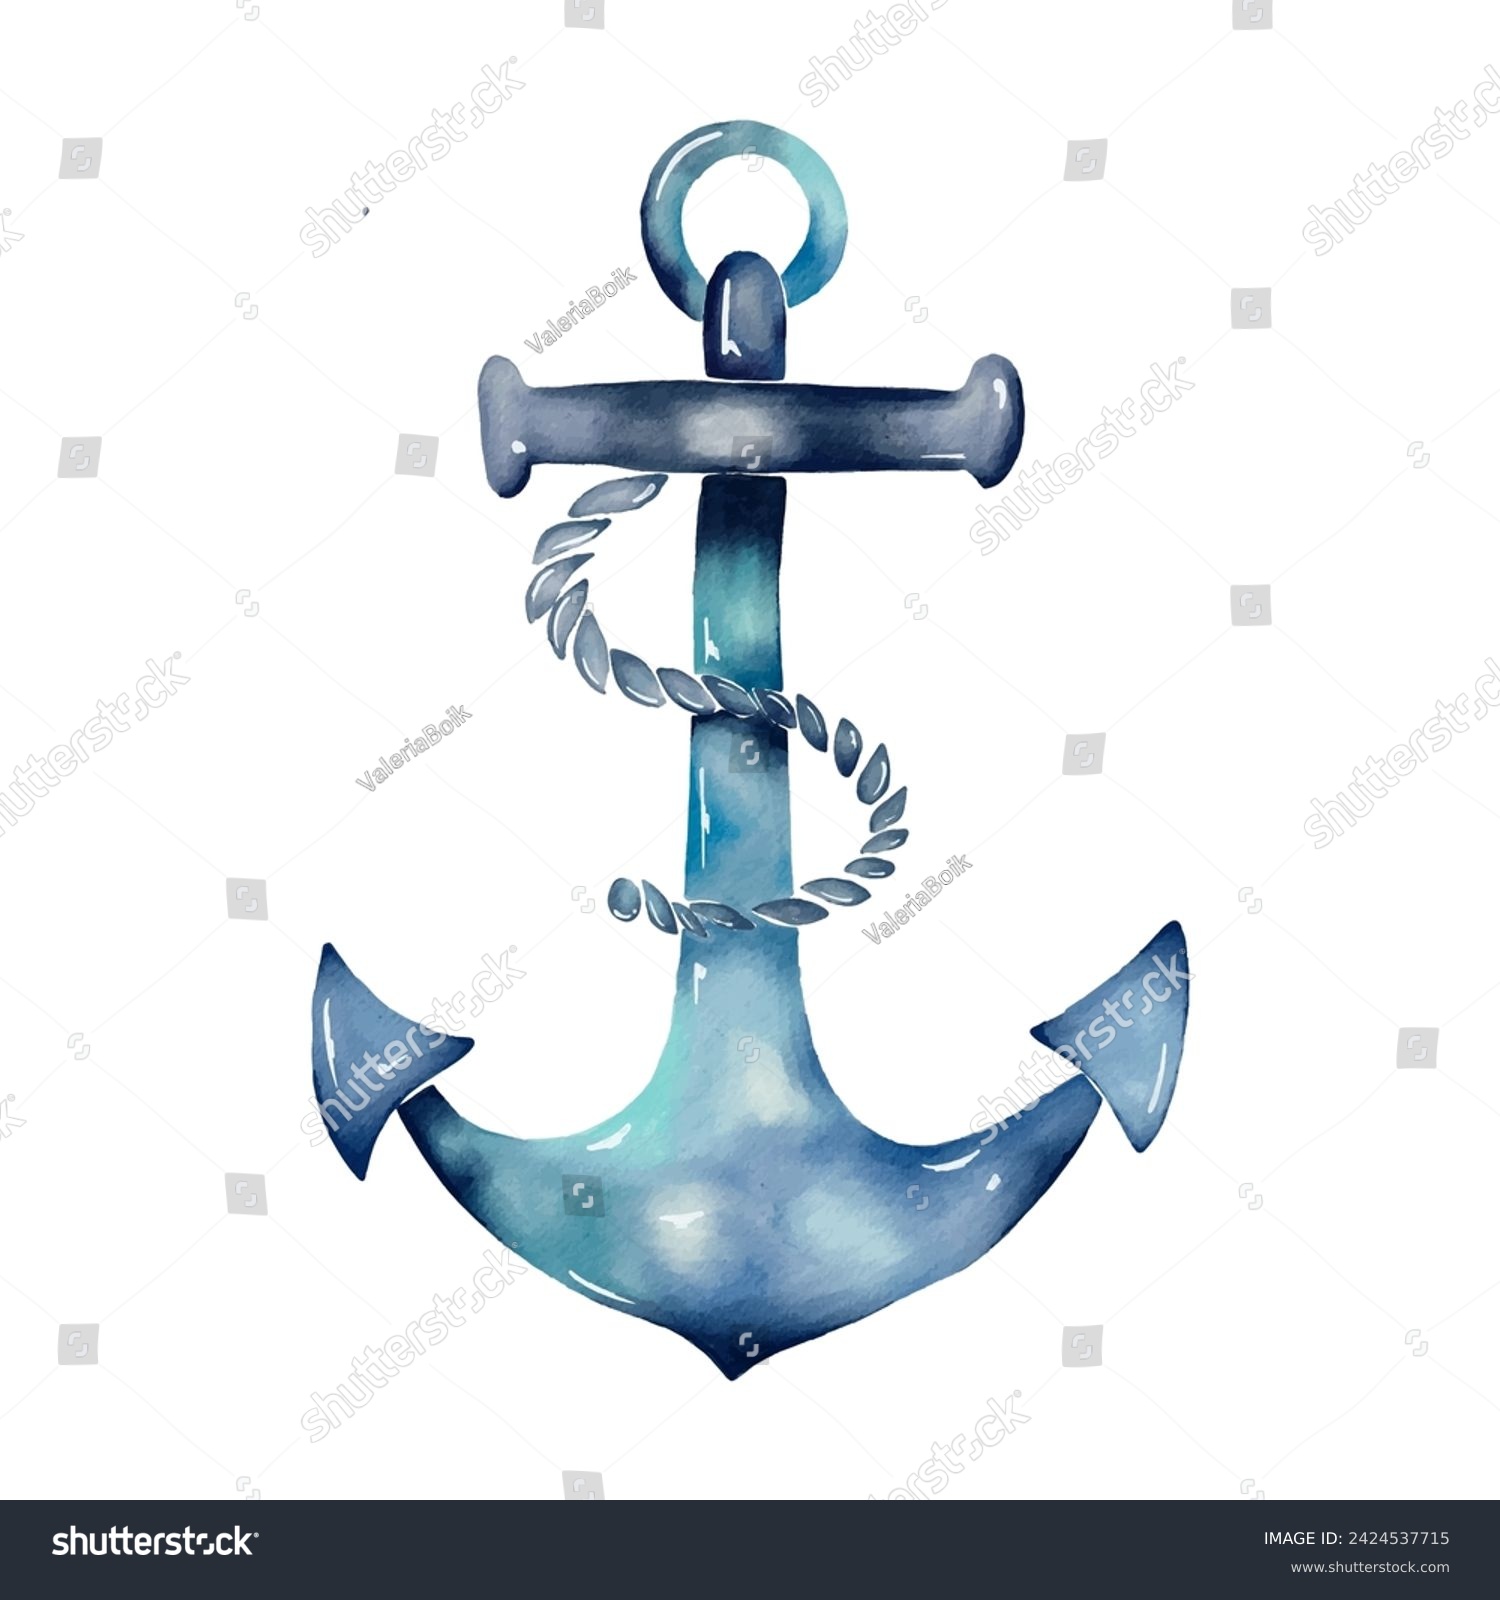 SVG of Vector anchor clip art isolated  on white background. Anchor print design in watercolour style, blue color palette. Children's Illustration  svg